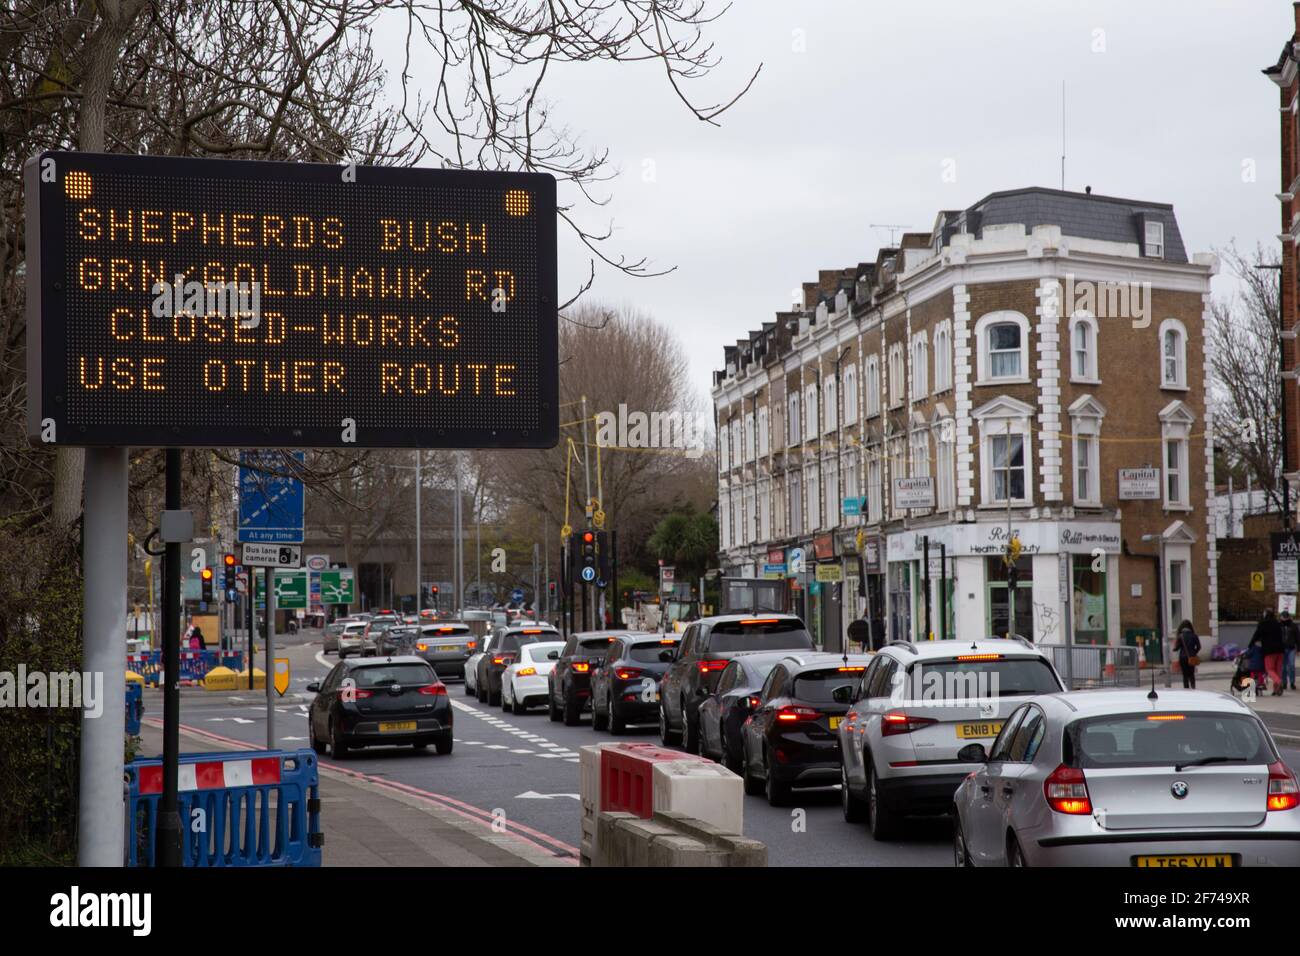 Traffic jam along with sign warning of road closures. Chiswick High Road, London, UK Stock Photo